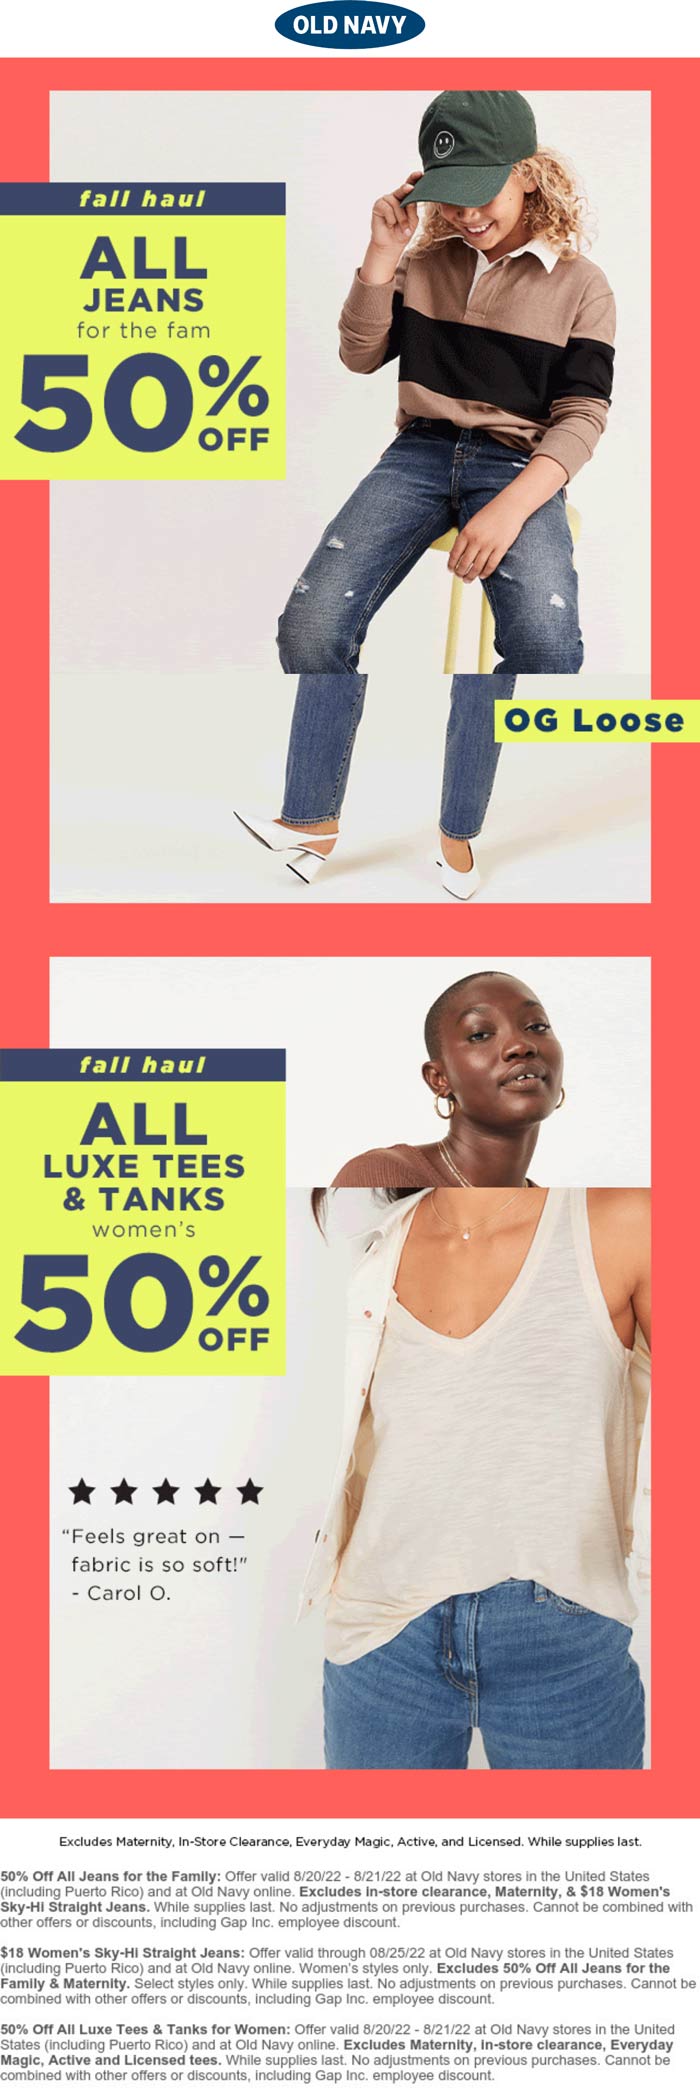 Old Navy stores Coupon  50% off jeans, tees & tanks at Old Navy, ditto online #oldnavy 